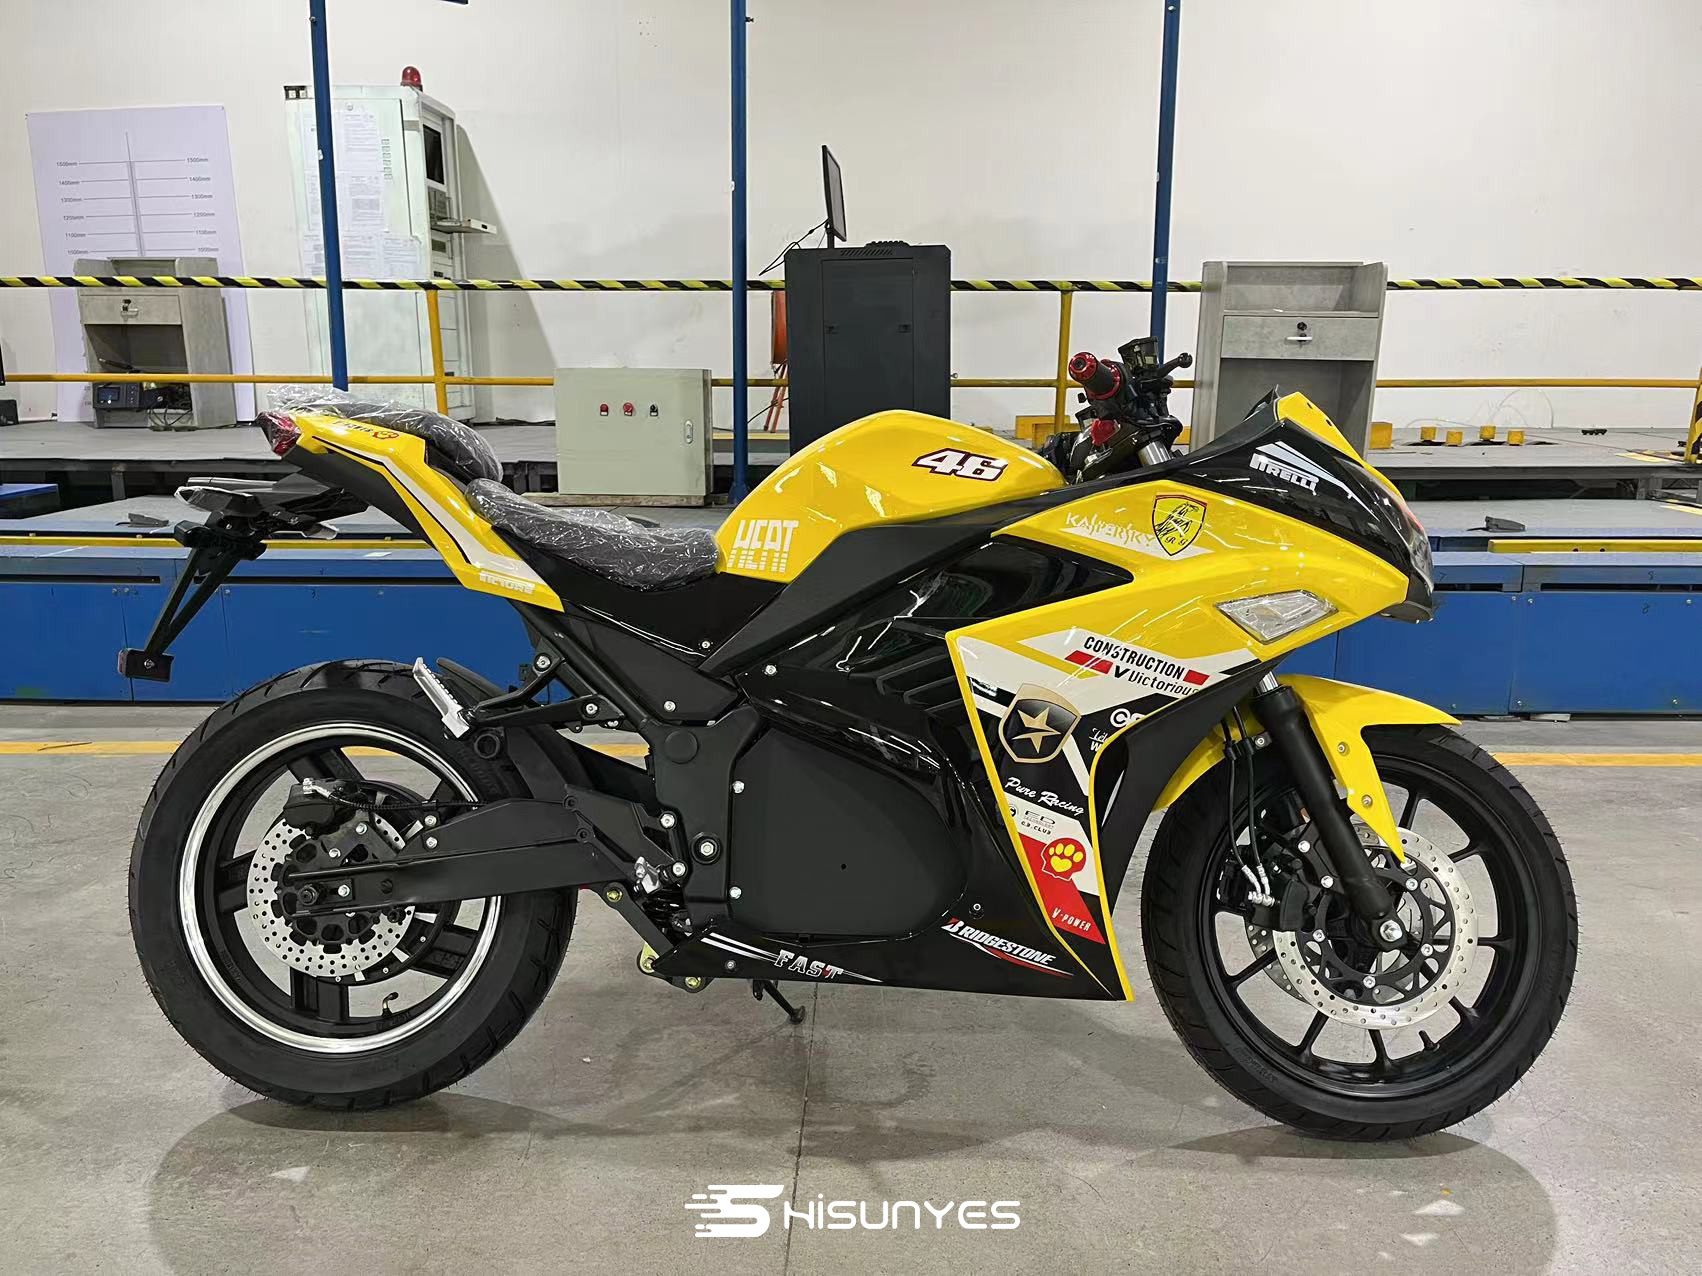 the new electric motorcycle V2 yellow